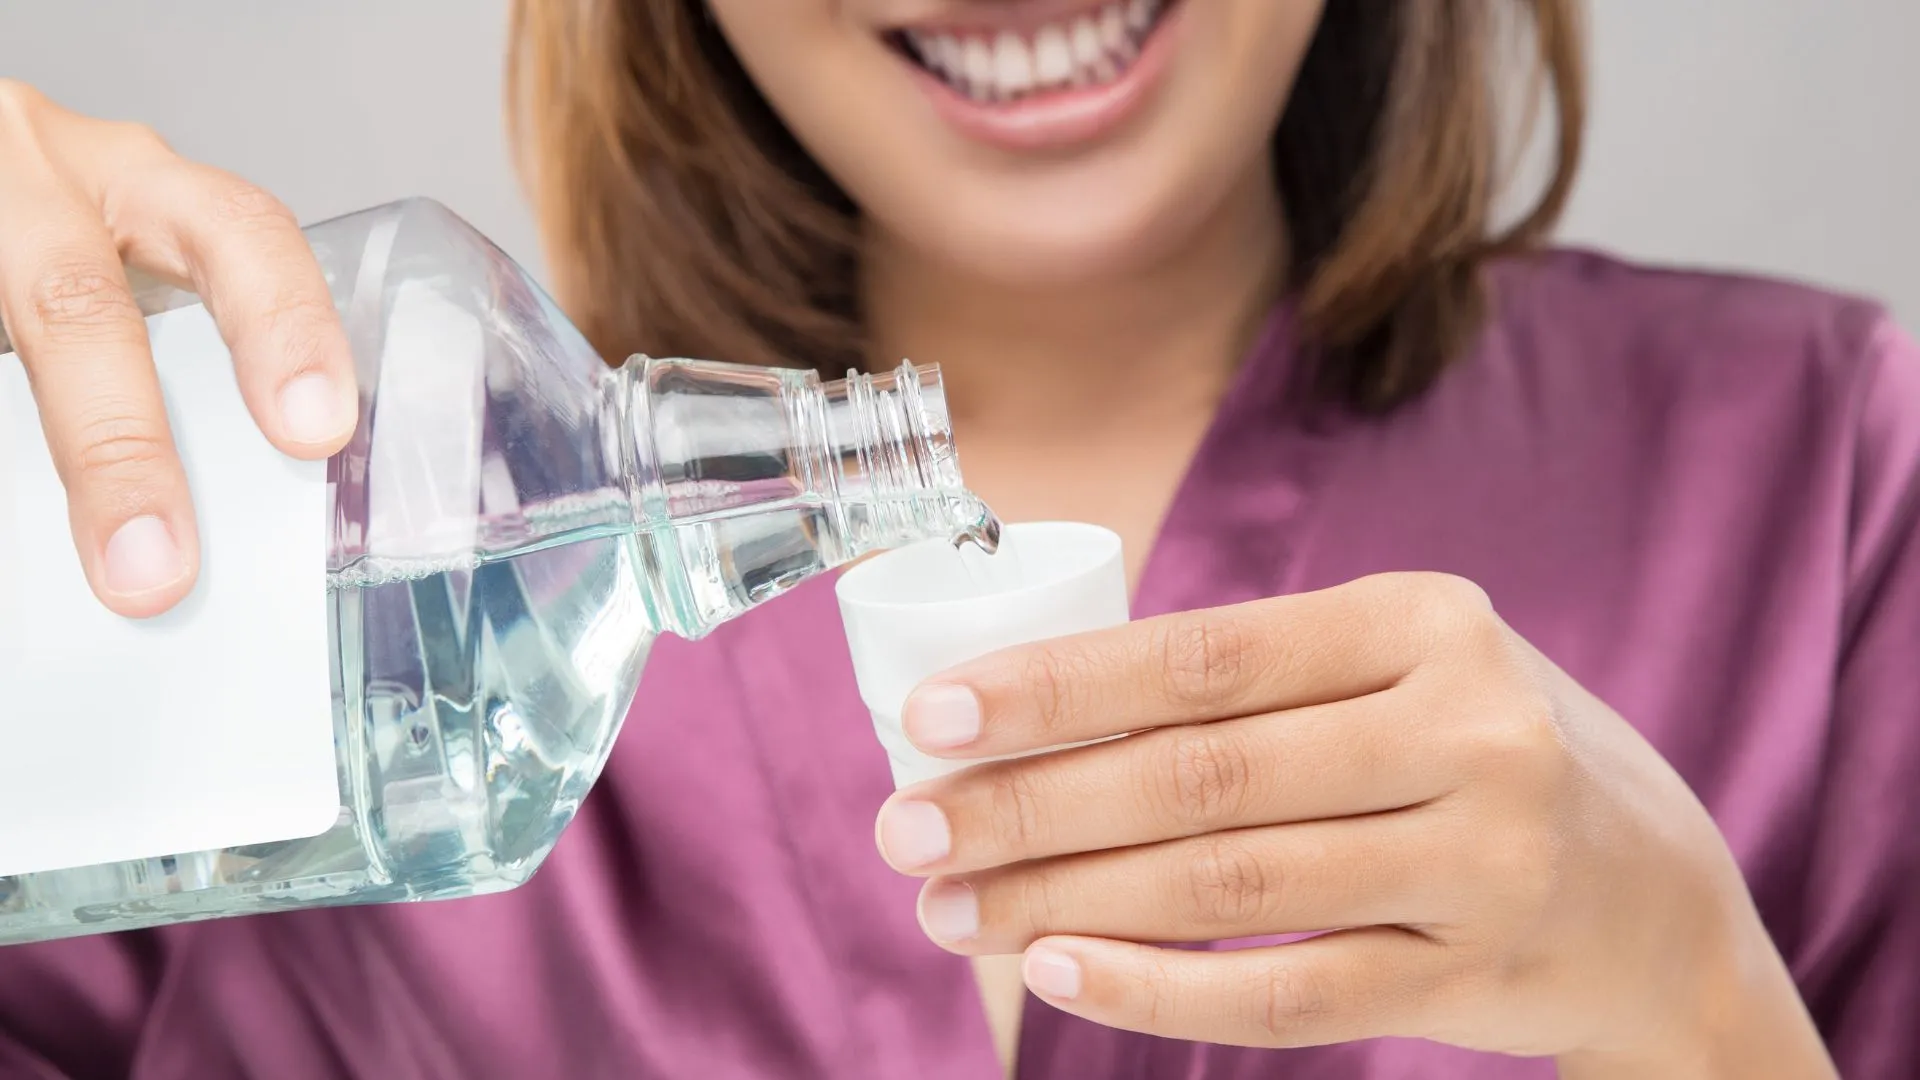 Mouthwash Has Way More Potential Than Just Being a Product for Bad Breath